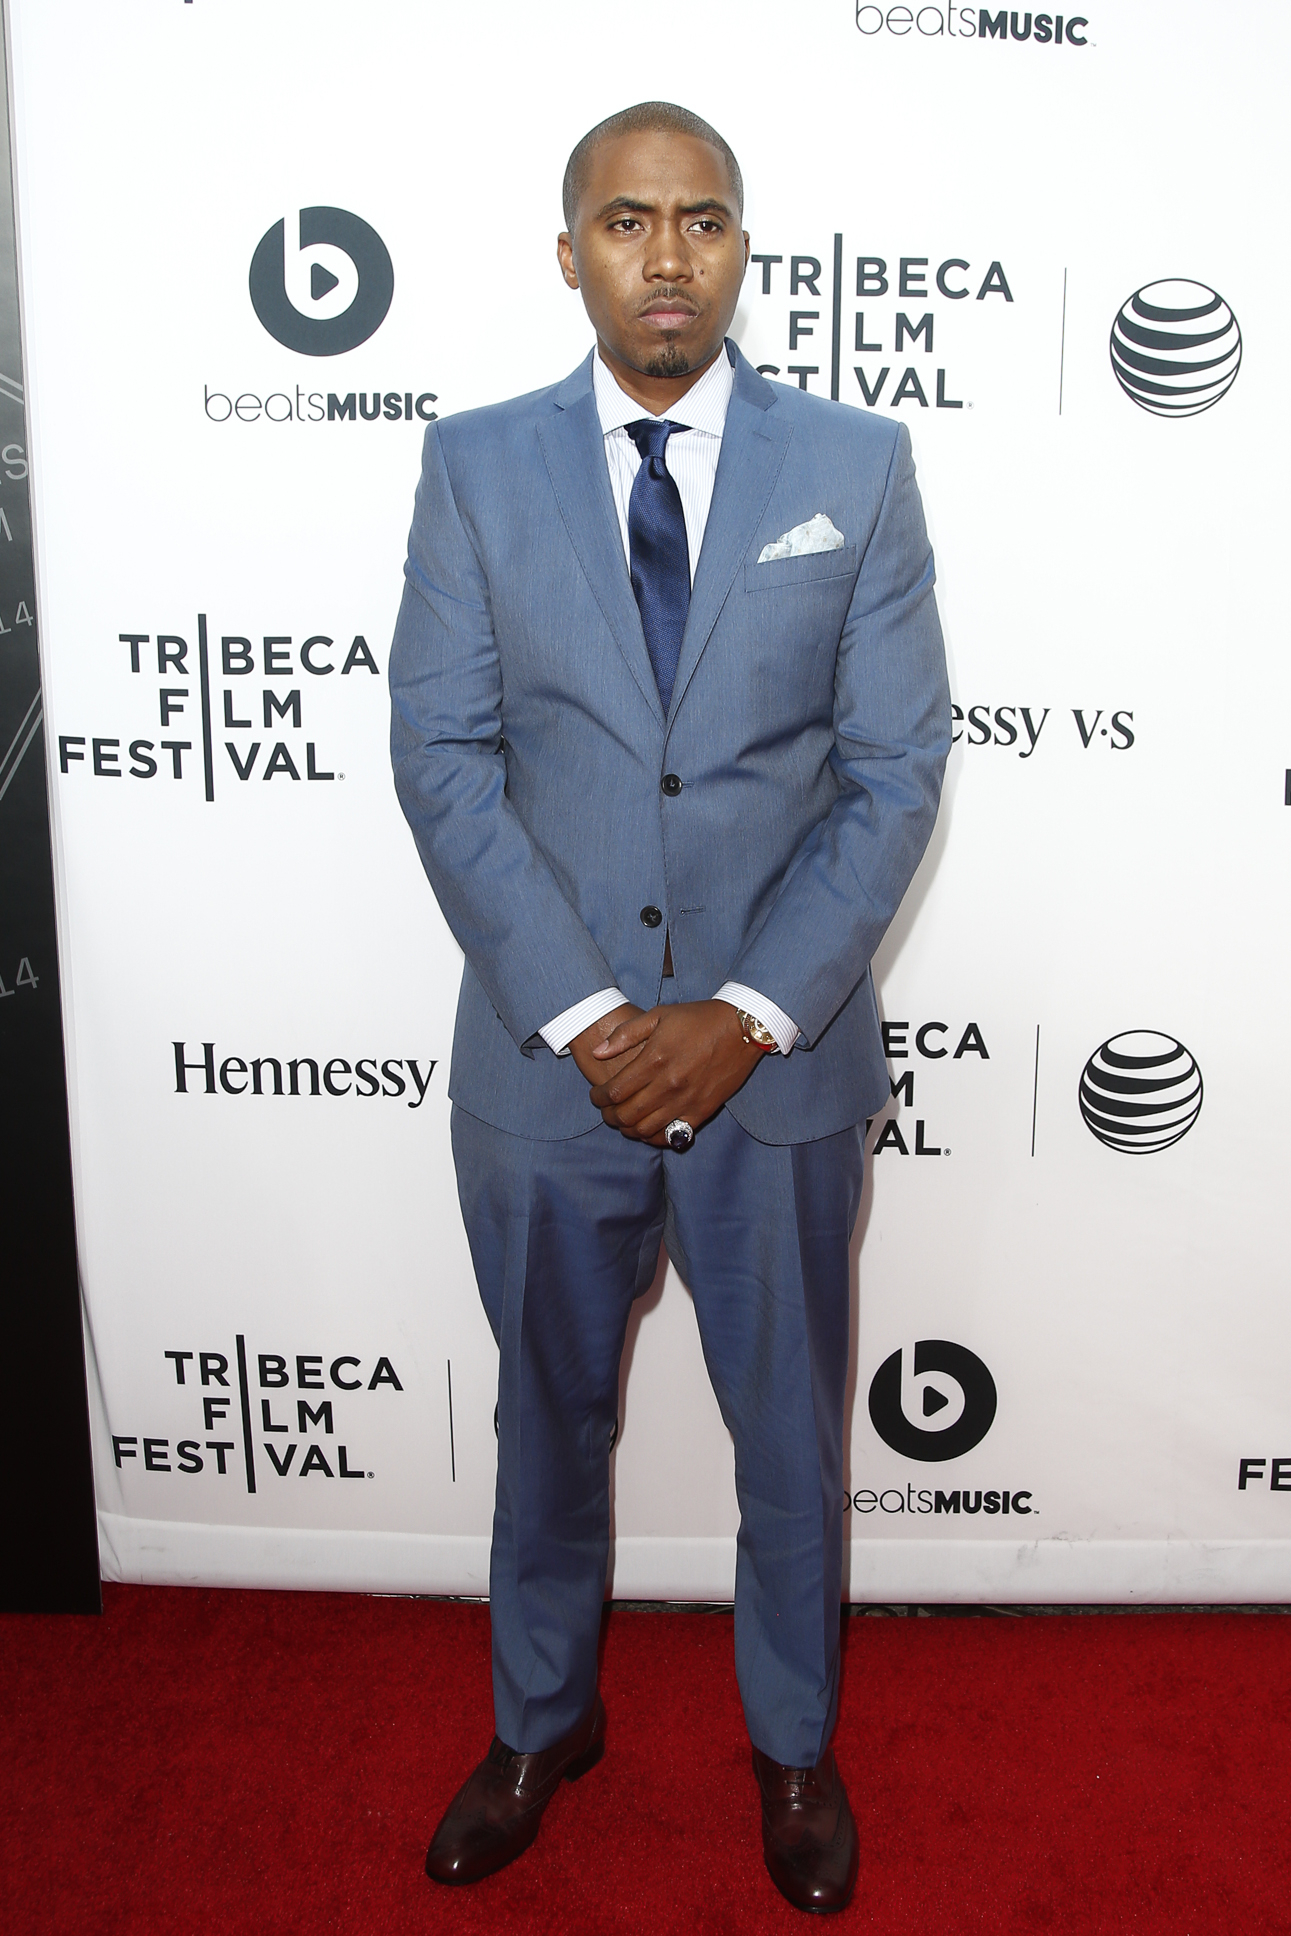 04/16/2014 - Nas - 2014 Tribeca Film Festival - Opening Night - "Time is Illmatic" World Premiere - Arrivals - The Beacon Theatre - New York City, NY, USA - Keywords: Beacon Theatre, Tribeca Film Festival, New York City, Celebrities, Arrivals Orientation: Portrait Face Count: 1 - False - Photo Credit: MJ Photos / PRPhotos.com - Contact (1-866-551-7827) - Portrait Face Count: 1